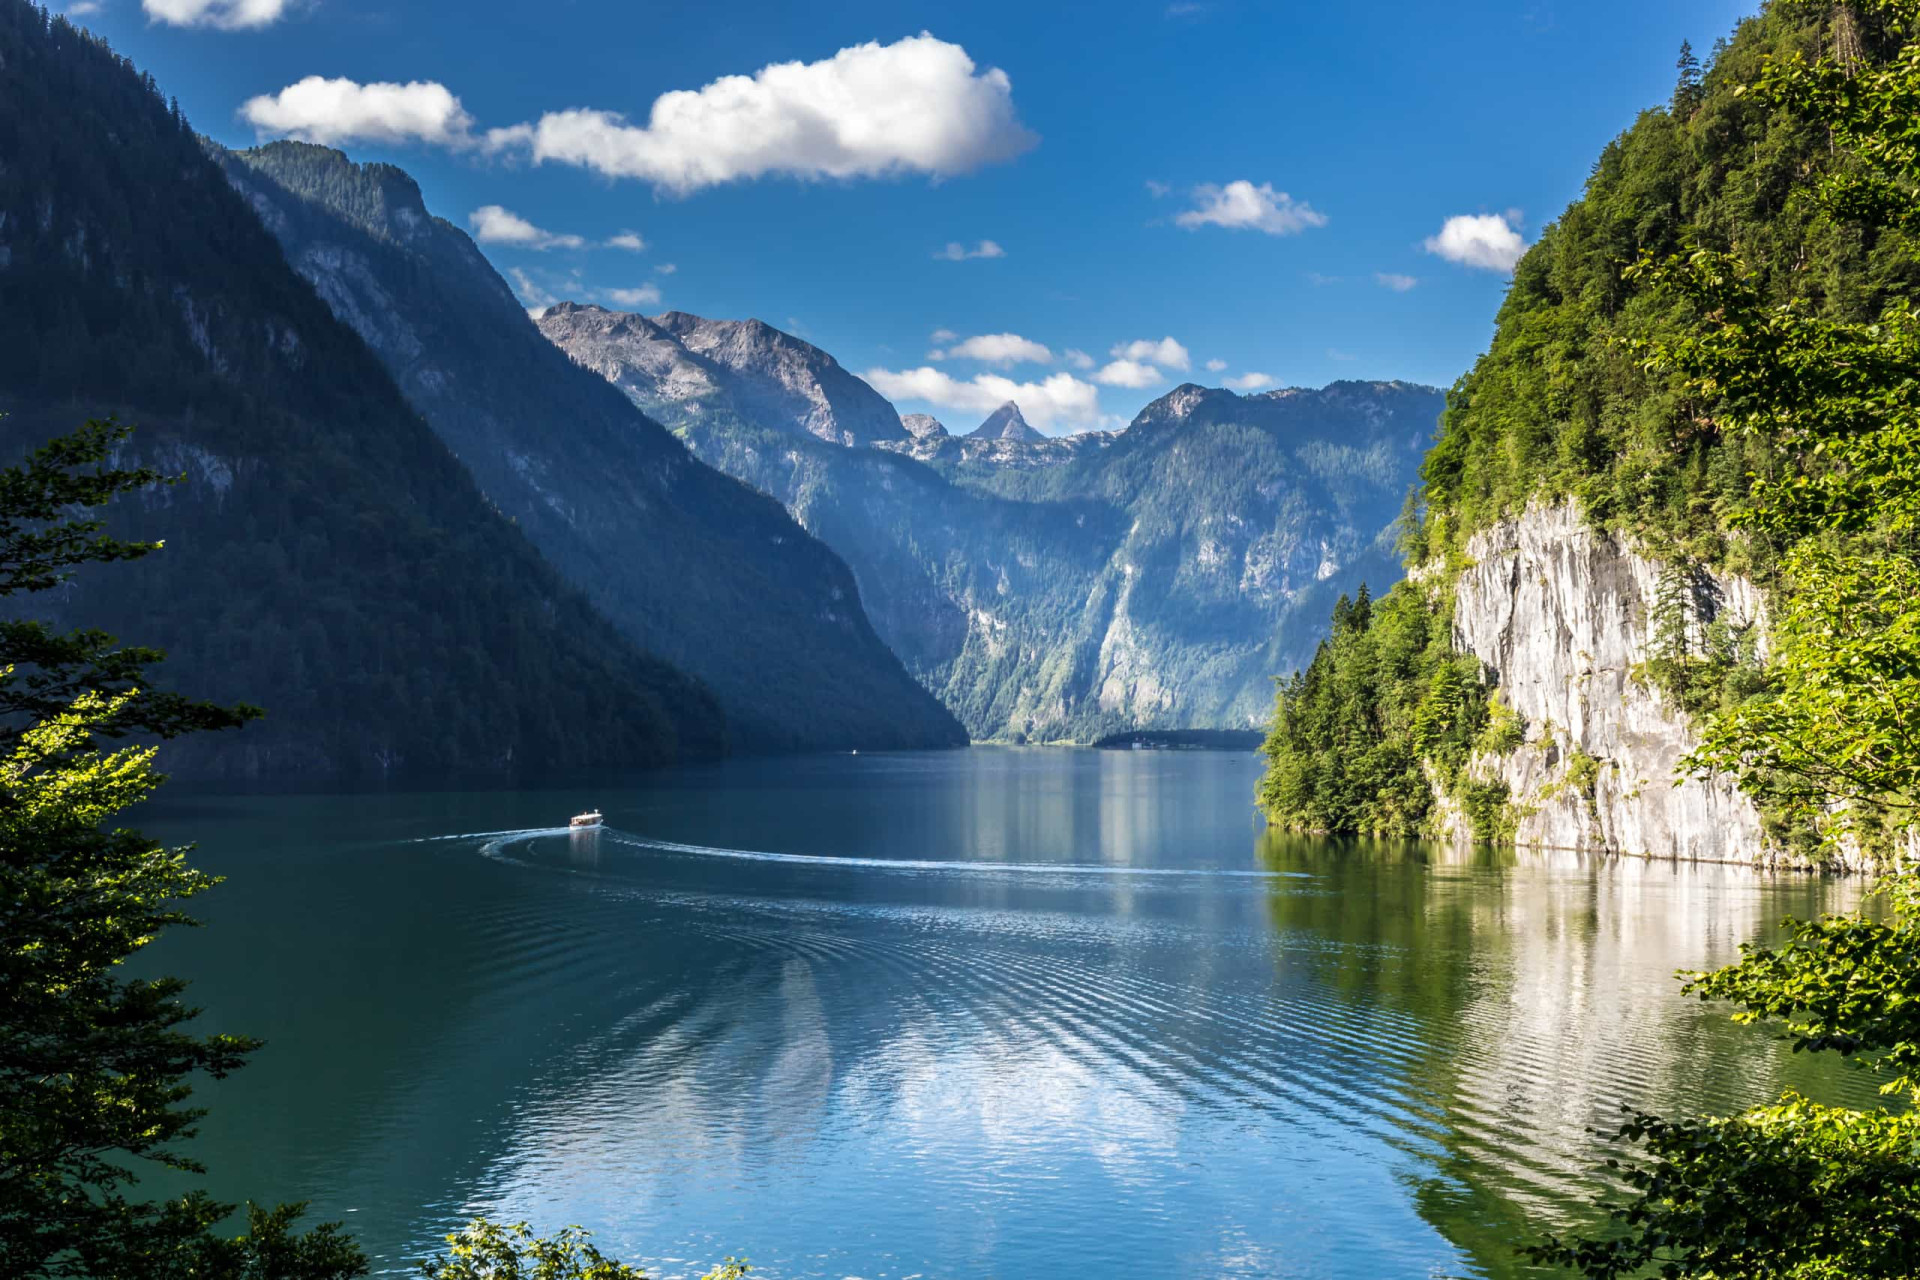 <p>The "King's Lake" is a majestic body of water set in the UNESCO-protected Berchtesgaden National Park. Königssee is considered the most beautiful body of water in Germany.</p><p><a href="https://www.msn.com/en-us/community/channel/vid-7xx8mnucu55yw63we9va2gwr7uihbxwc68fxqp25x6tg4ftibpra?cvid=94631541bc0f4f89bfd59158d696ad7e">Follow us and access great exclusive content every day</a></p>